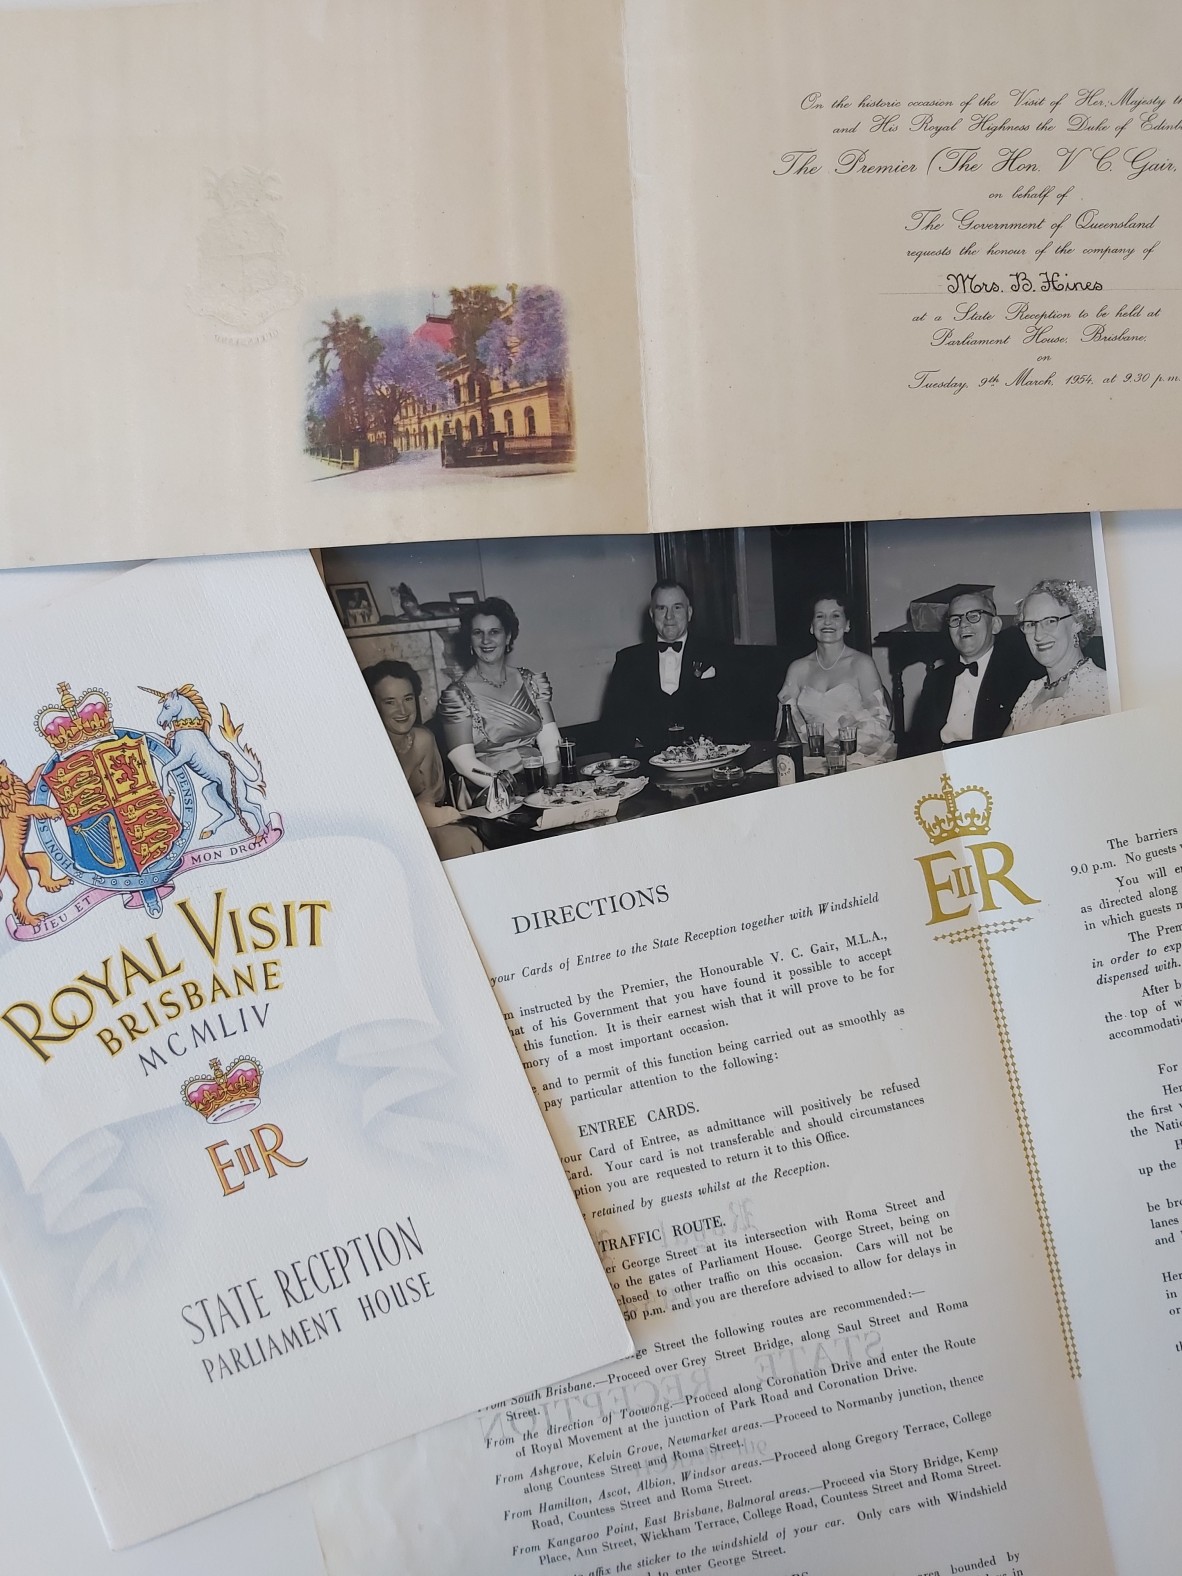 Invitation, formal directions and program for the Royal visit and State Reception, March 1954